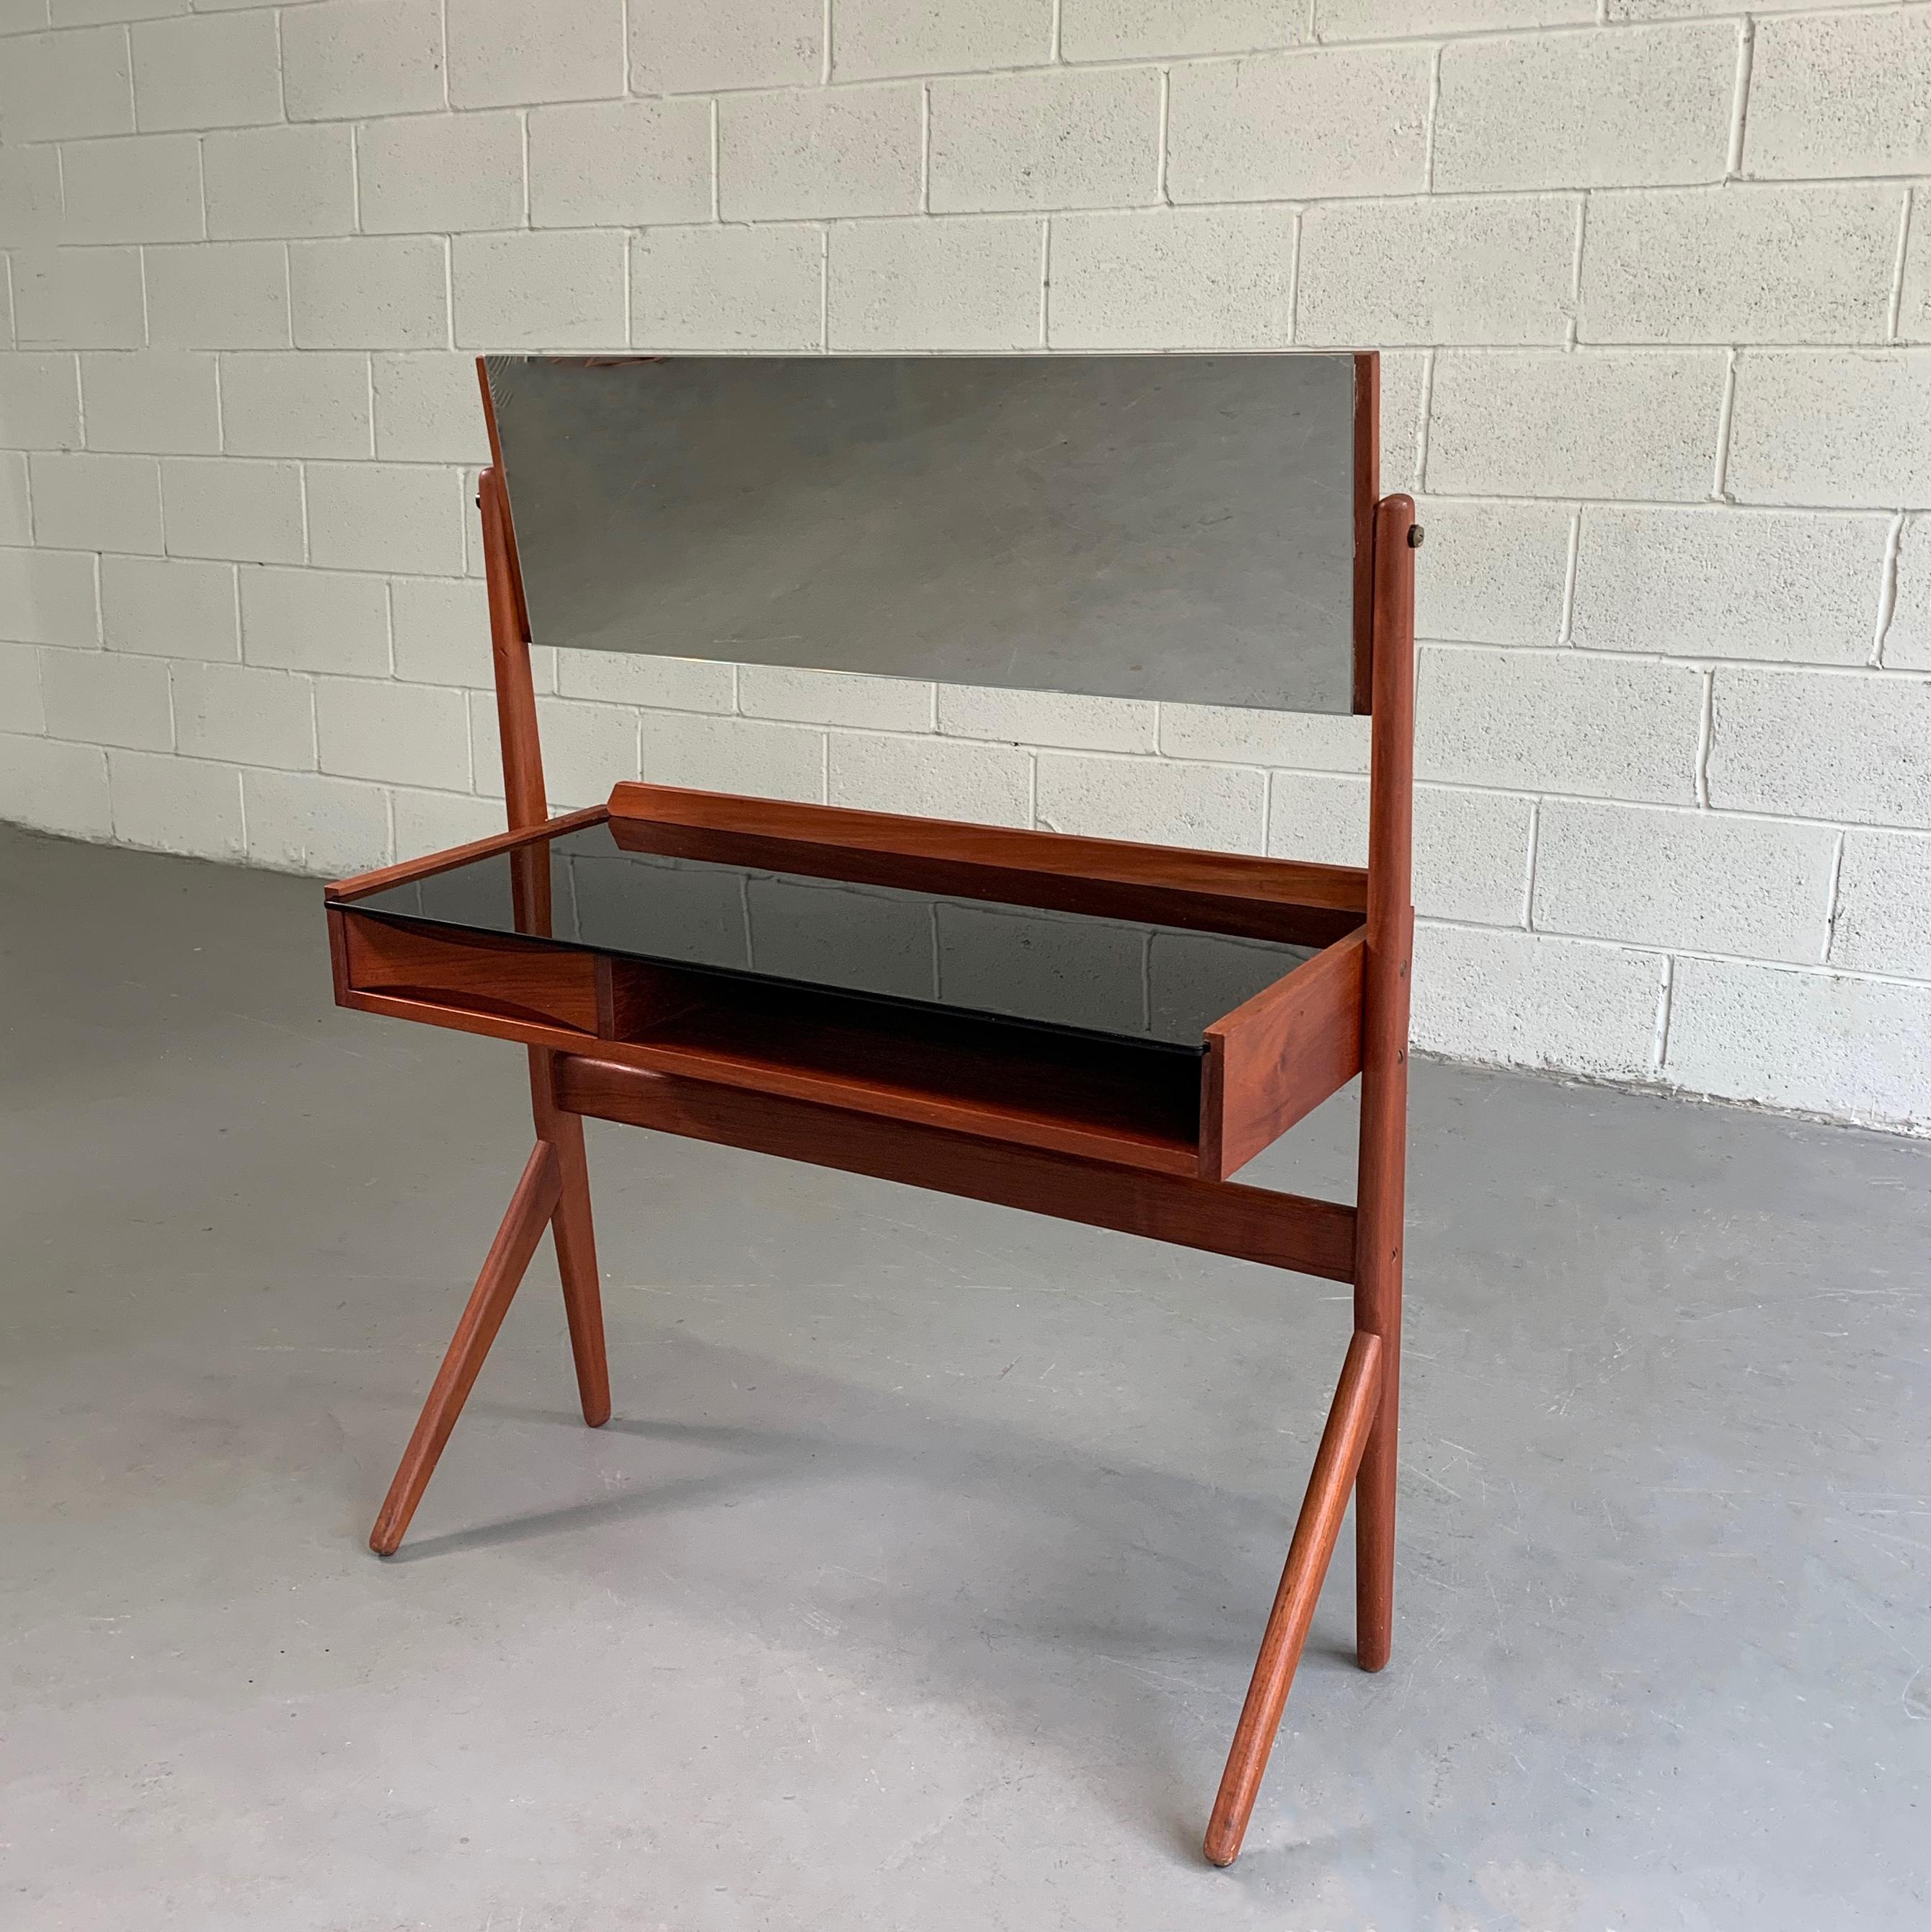 Petite, Danish modern, teak vanity, dressing table by Arne Vodder for Ølholm Møebelfabrik features compass legs, black glass top and tilt adjustable mirror. Under the desk there is one drawer with bowtie pull and an open compartment. The table